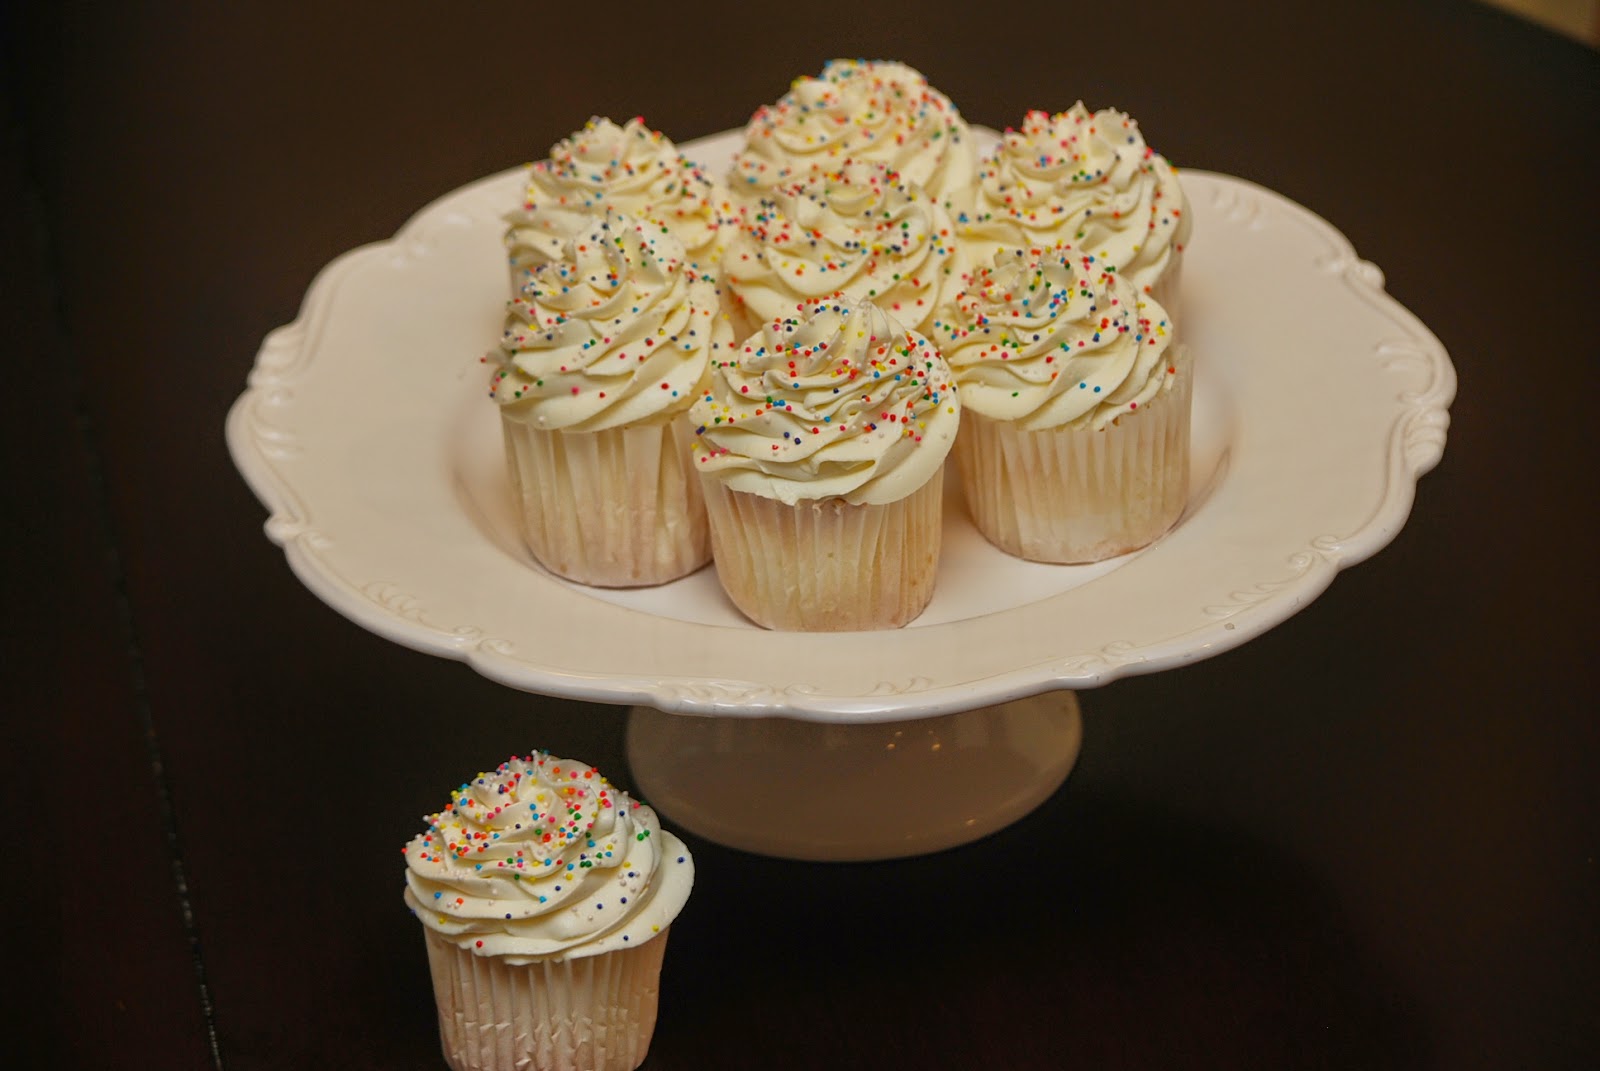 My story in recipes: Angel Food Cupcakes